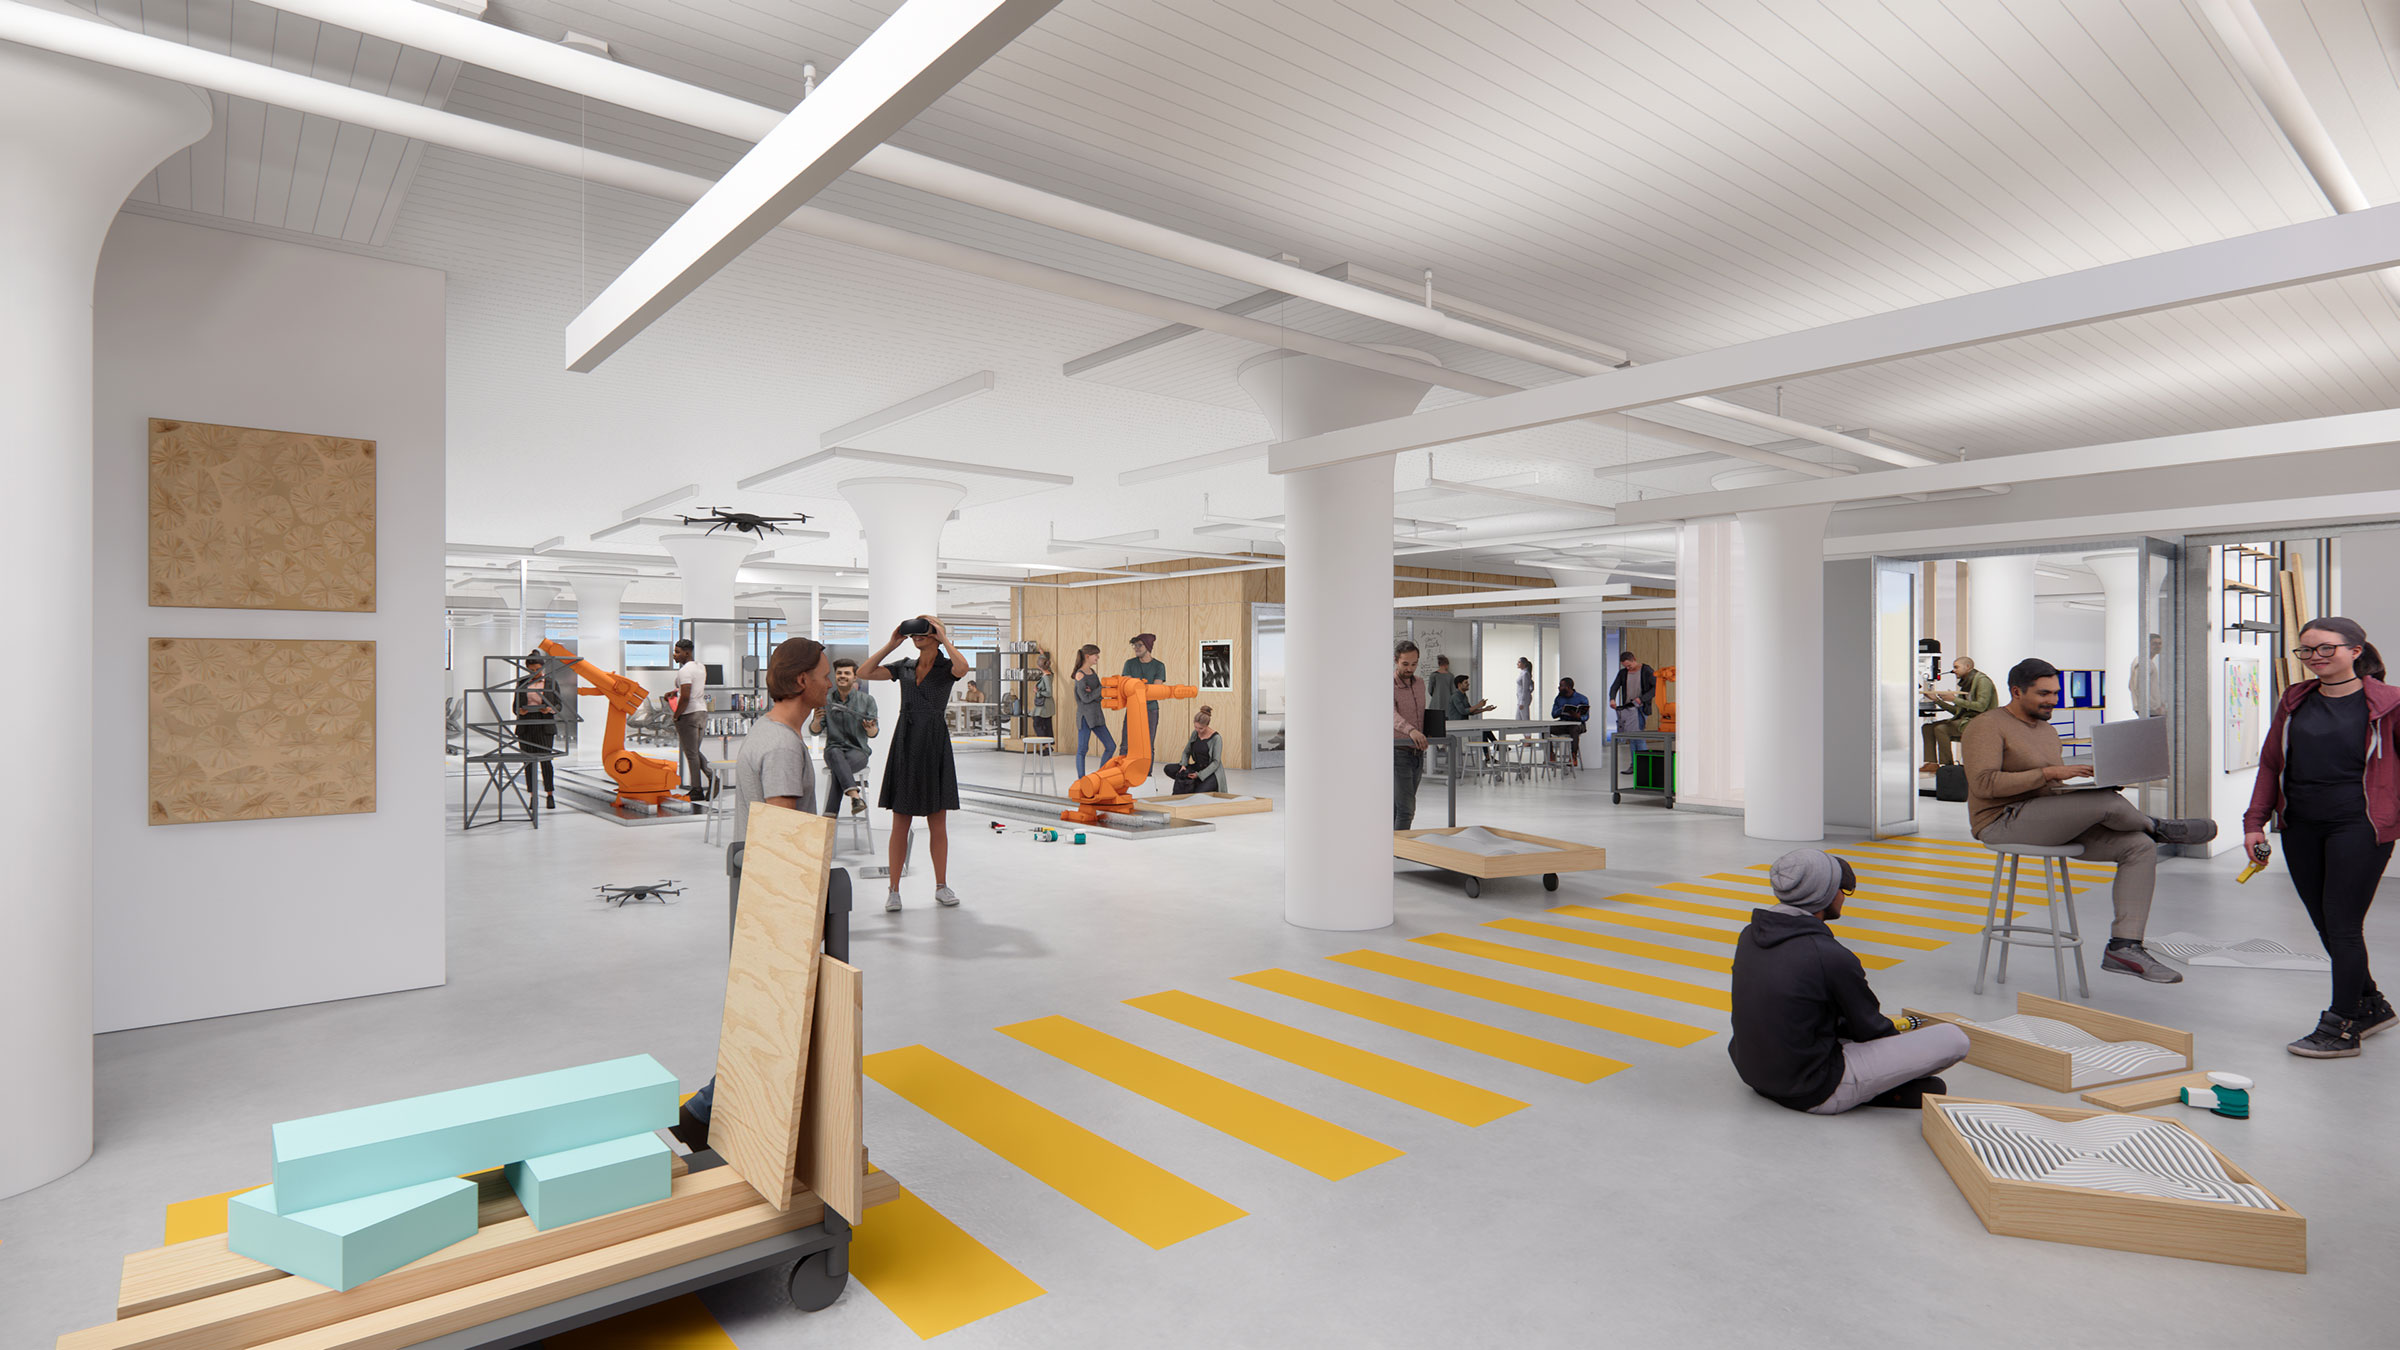 Students work and collaborate in an expansive, brightly lit facility